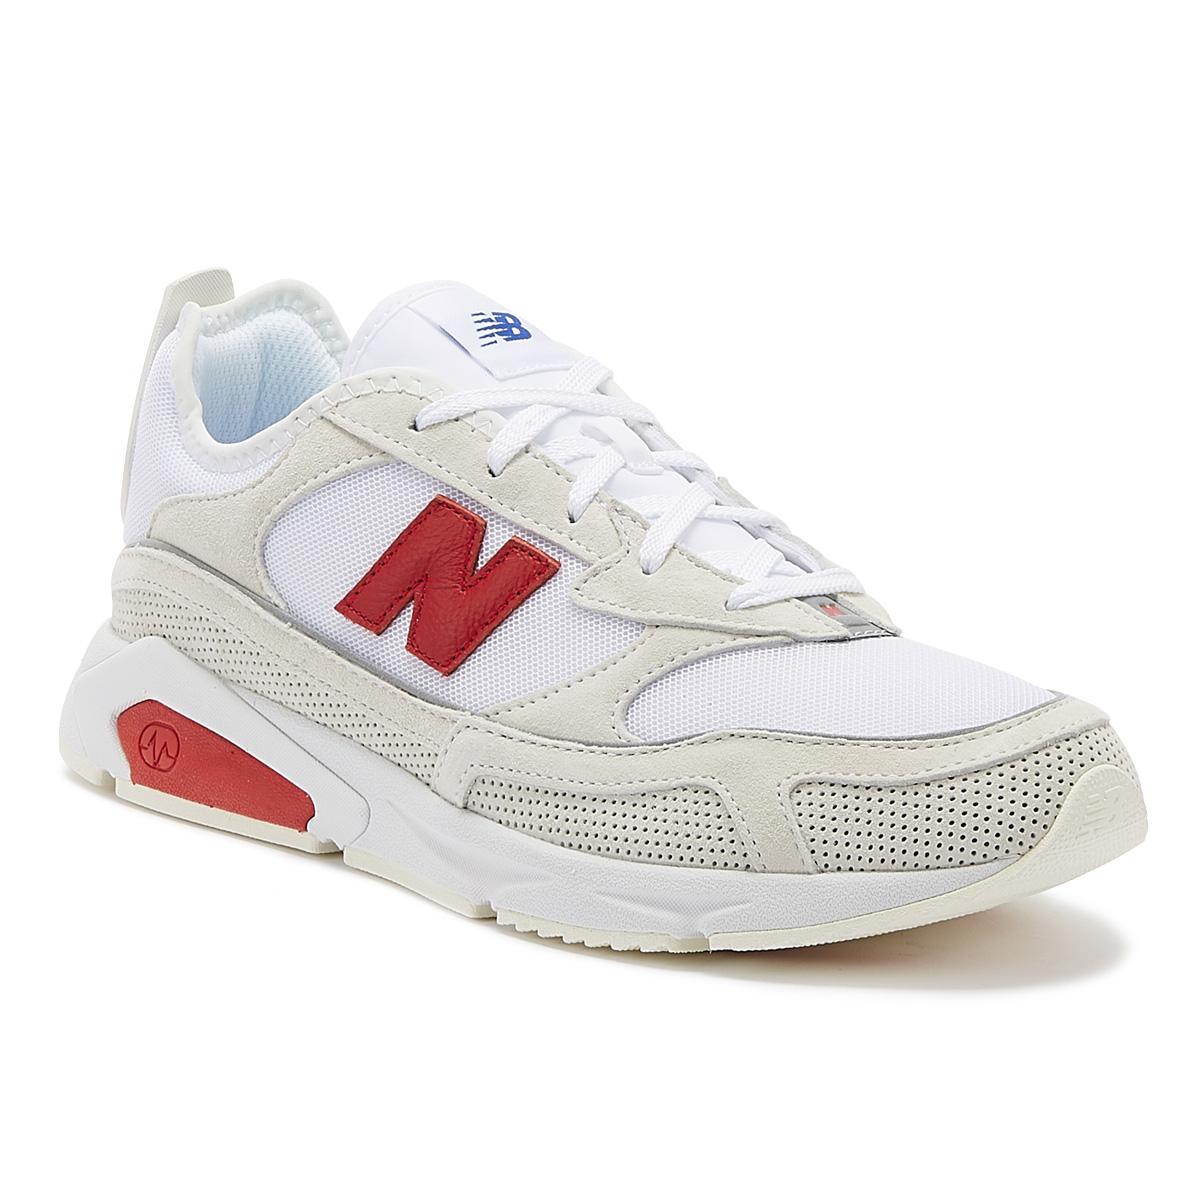 New Balance Suede X-racer Mens White / Red Trainers for Men - Lyst